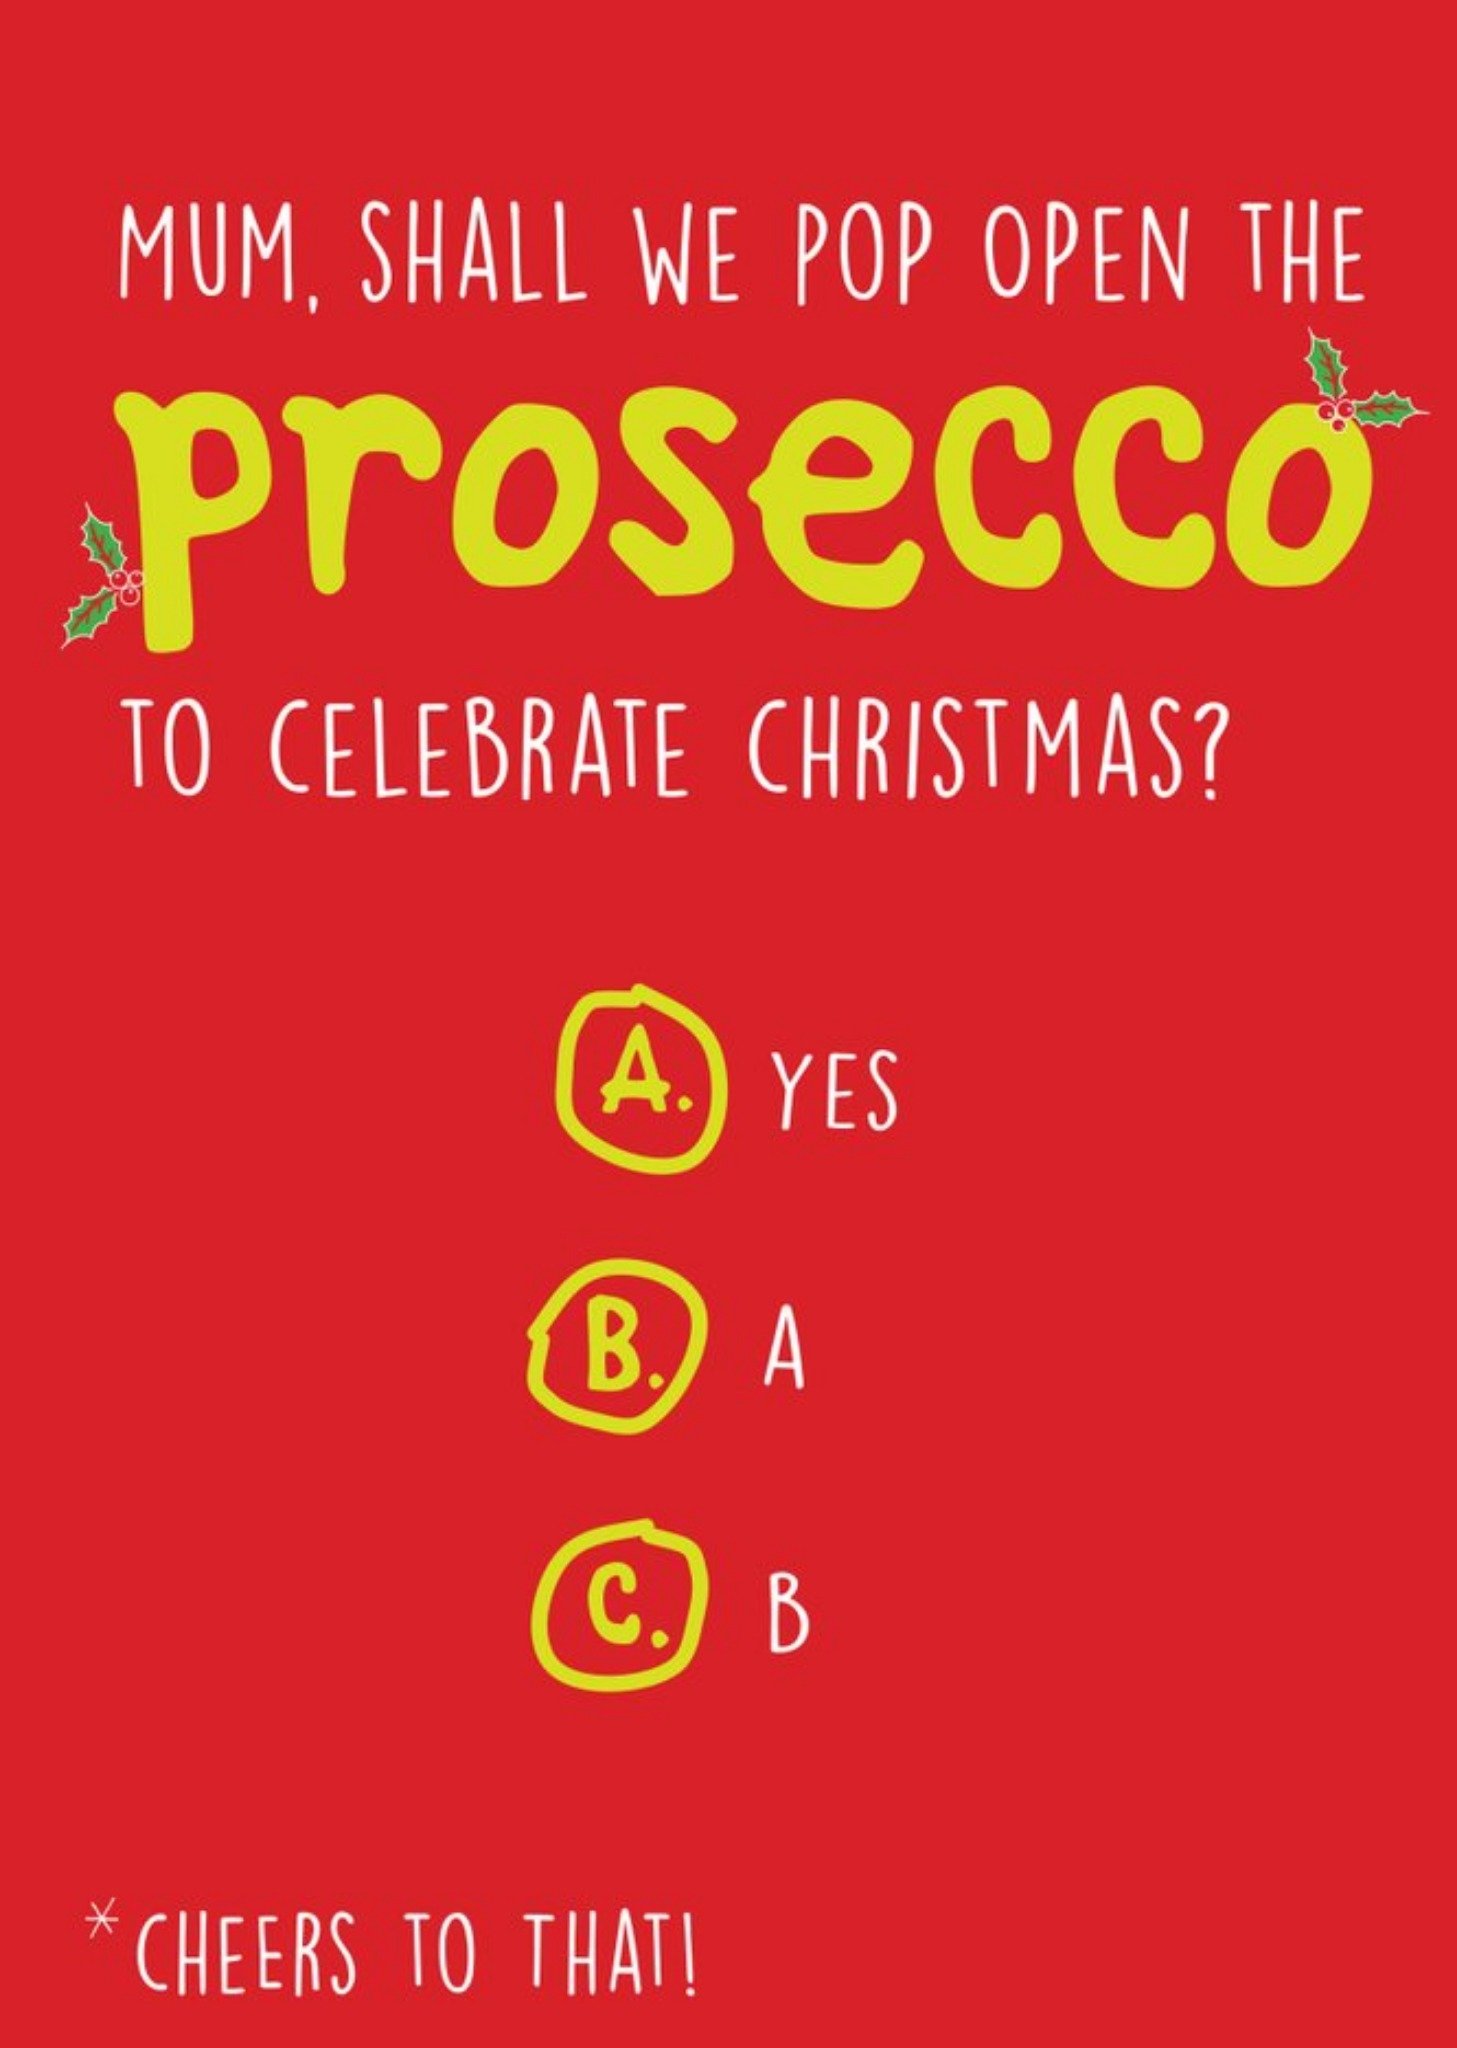 Moonpig Mum Shall We Pop The Prosecco Funny Christmas Card, Large